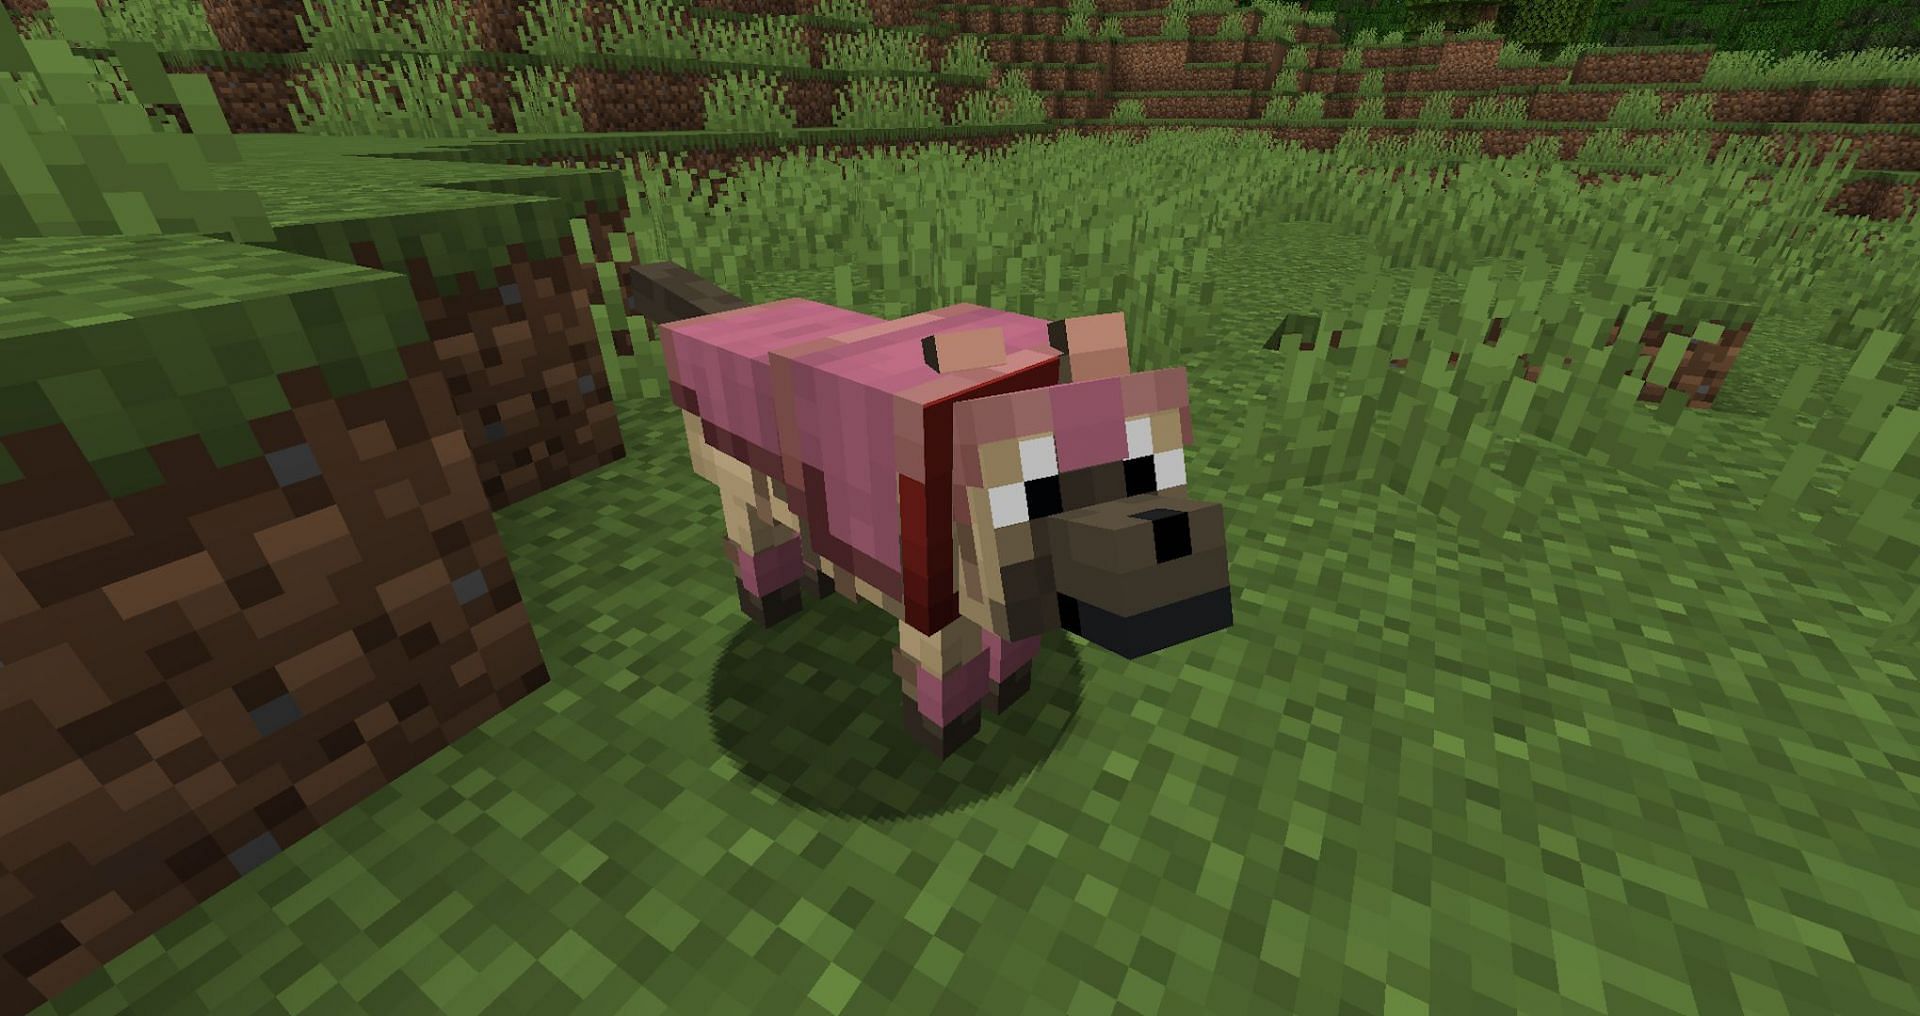 Wolf variants and armor allow for a lot of customization (Image via Mojang)